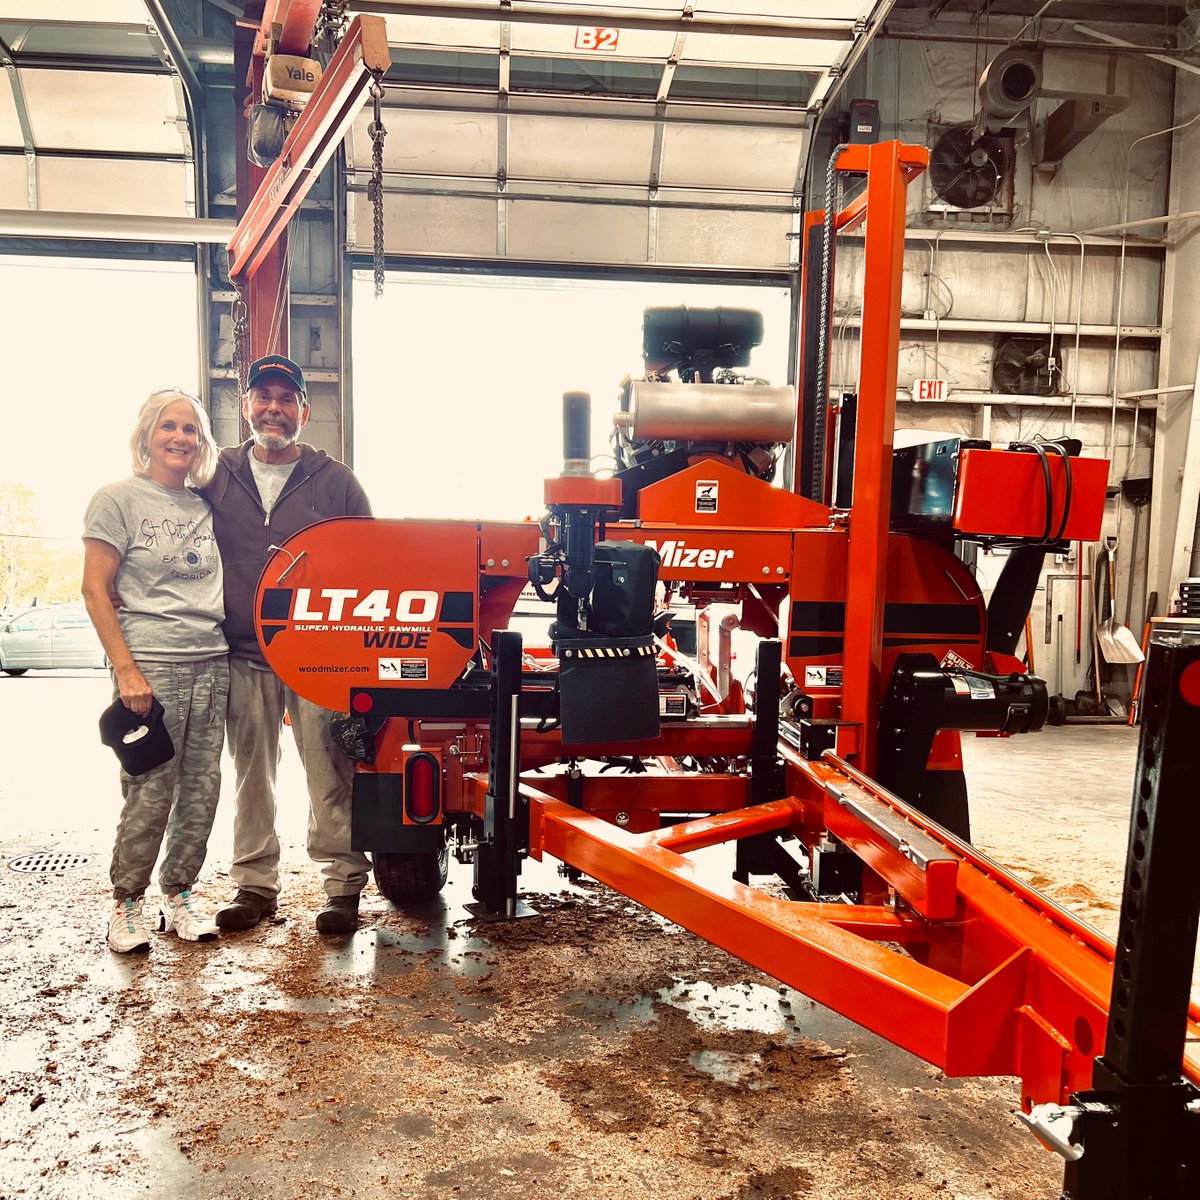 We had an LT40 Super Wide Hydraulic Sawmill pick up today in Indy! Congratulations to Dennis Modde and his wife! 

#woodmizer #woodmizerfamily #sawmills #livethewoodlife #sawyerlife